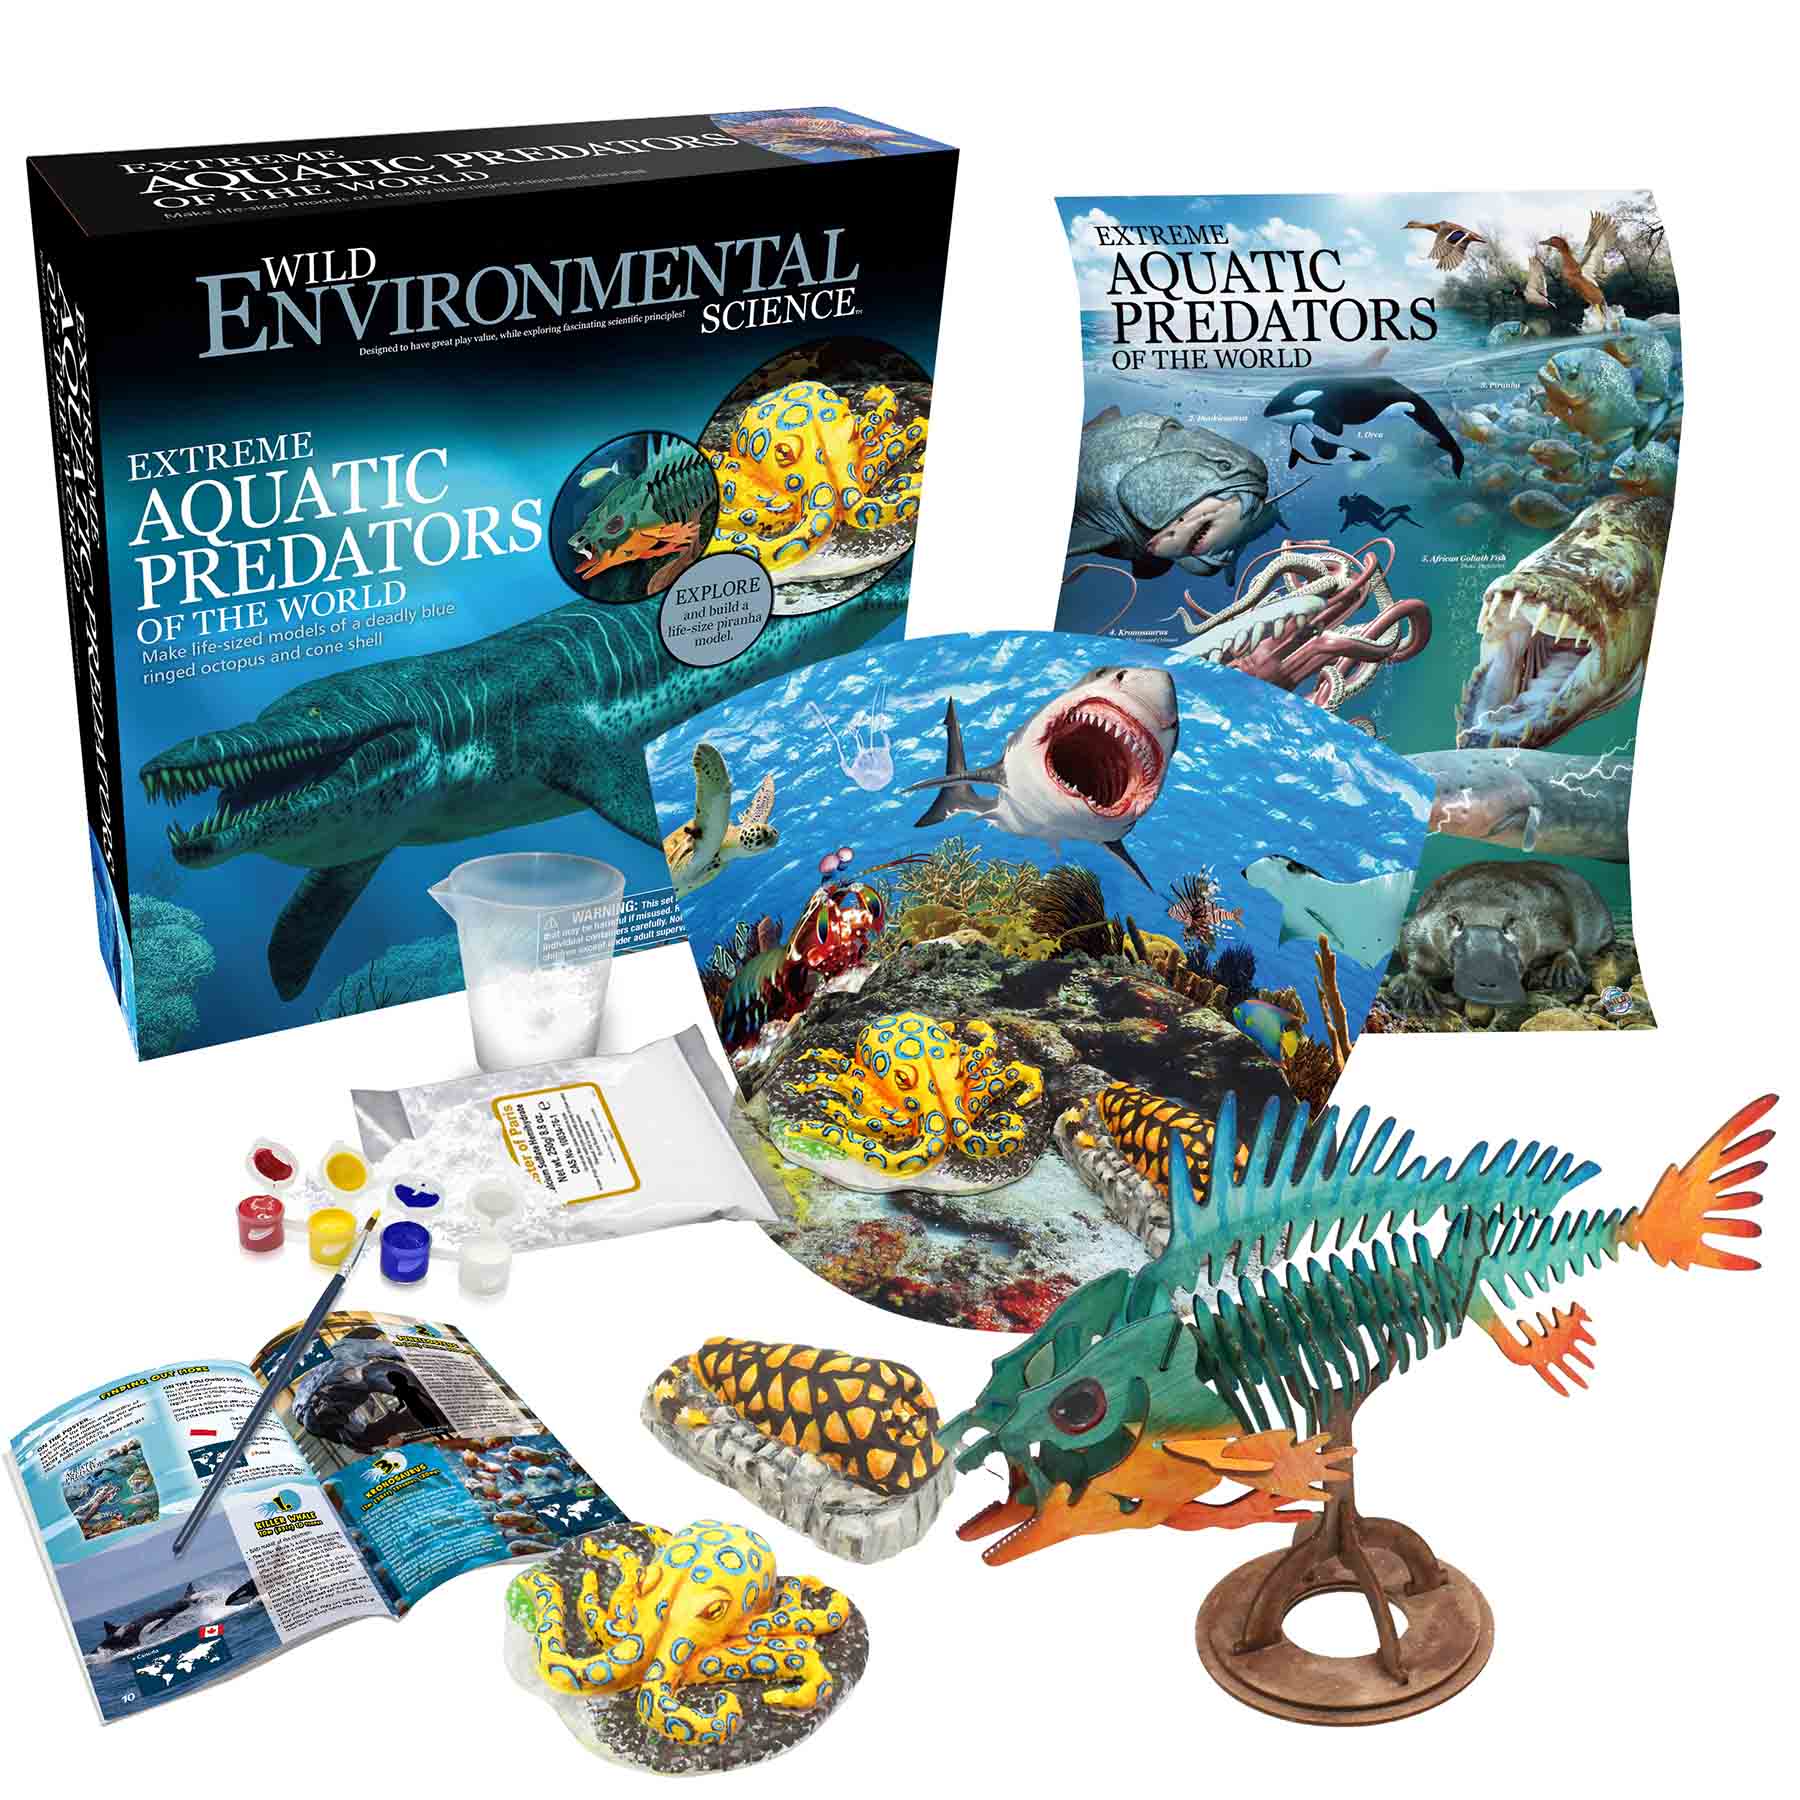 WILD ENVIRONMENTAL SCIENCE Extreme Aquatic Predators of the World - Ages 6+ - Create and Customize Models and Dioramas - Study Extreme Ocean Animals image number null